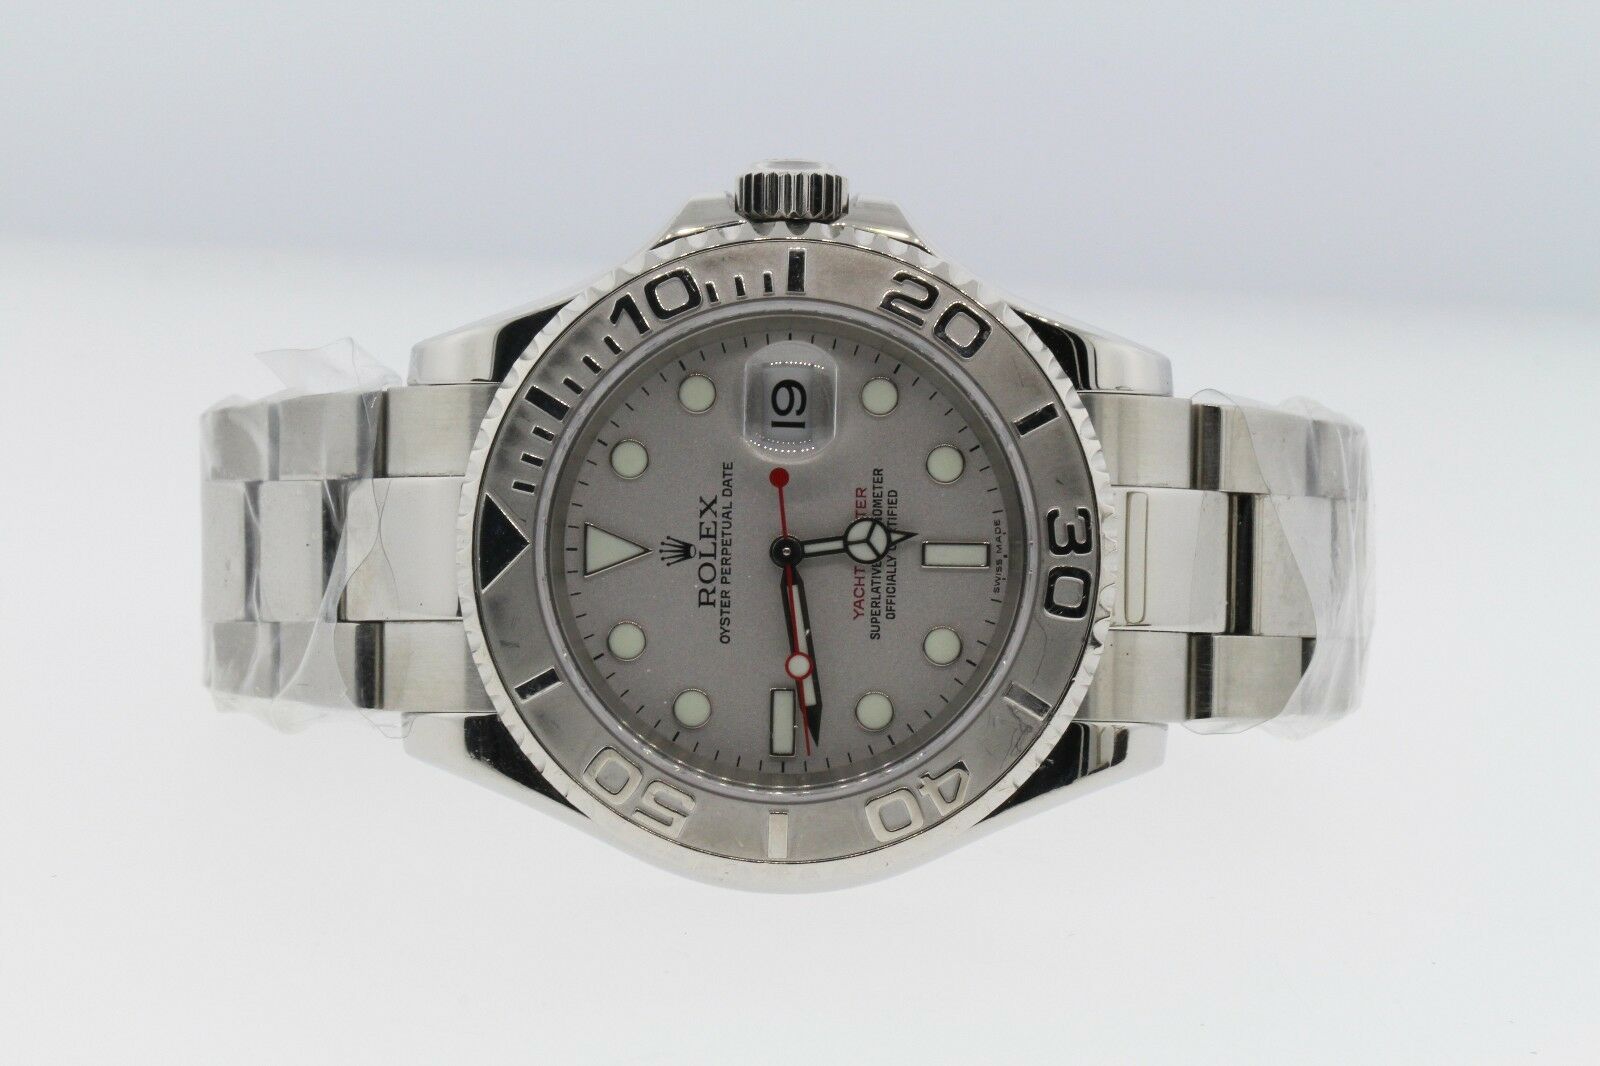 Rolex Yacht-Master 16622 40MM SS/Platinum Certified w/ Box/Papers $12350 Retail